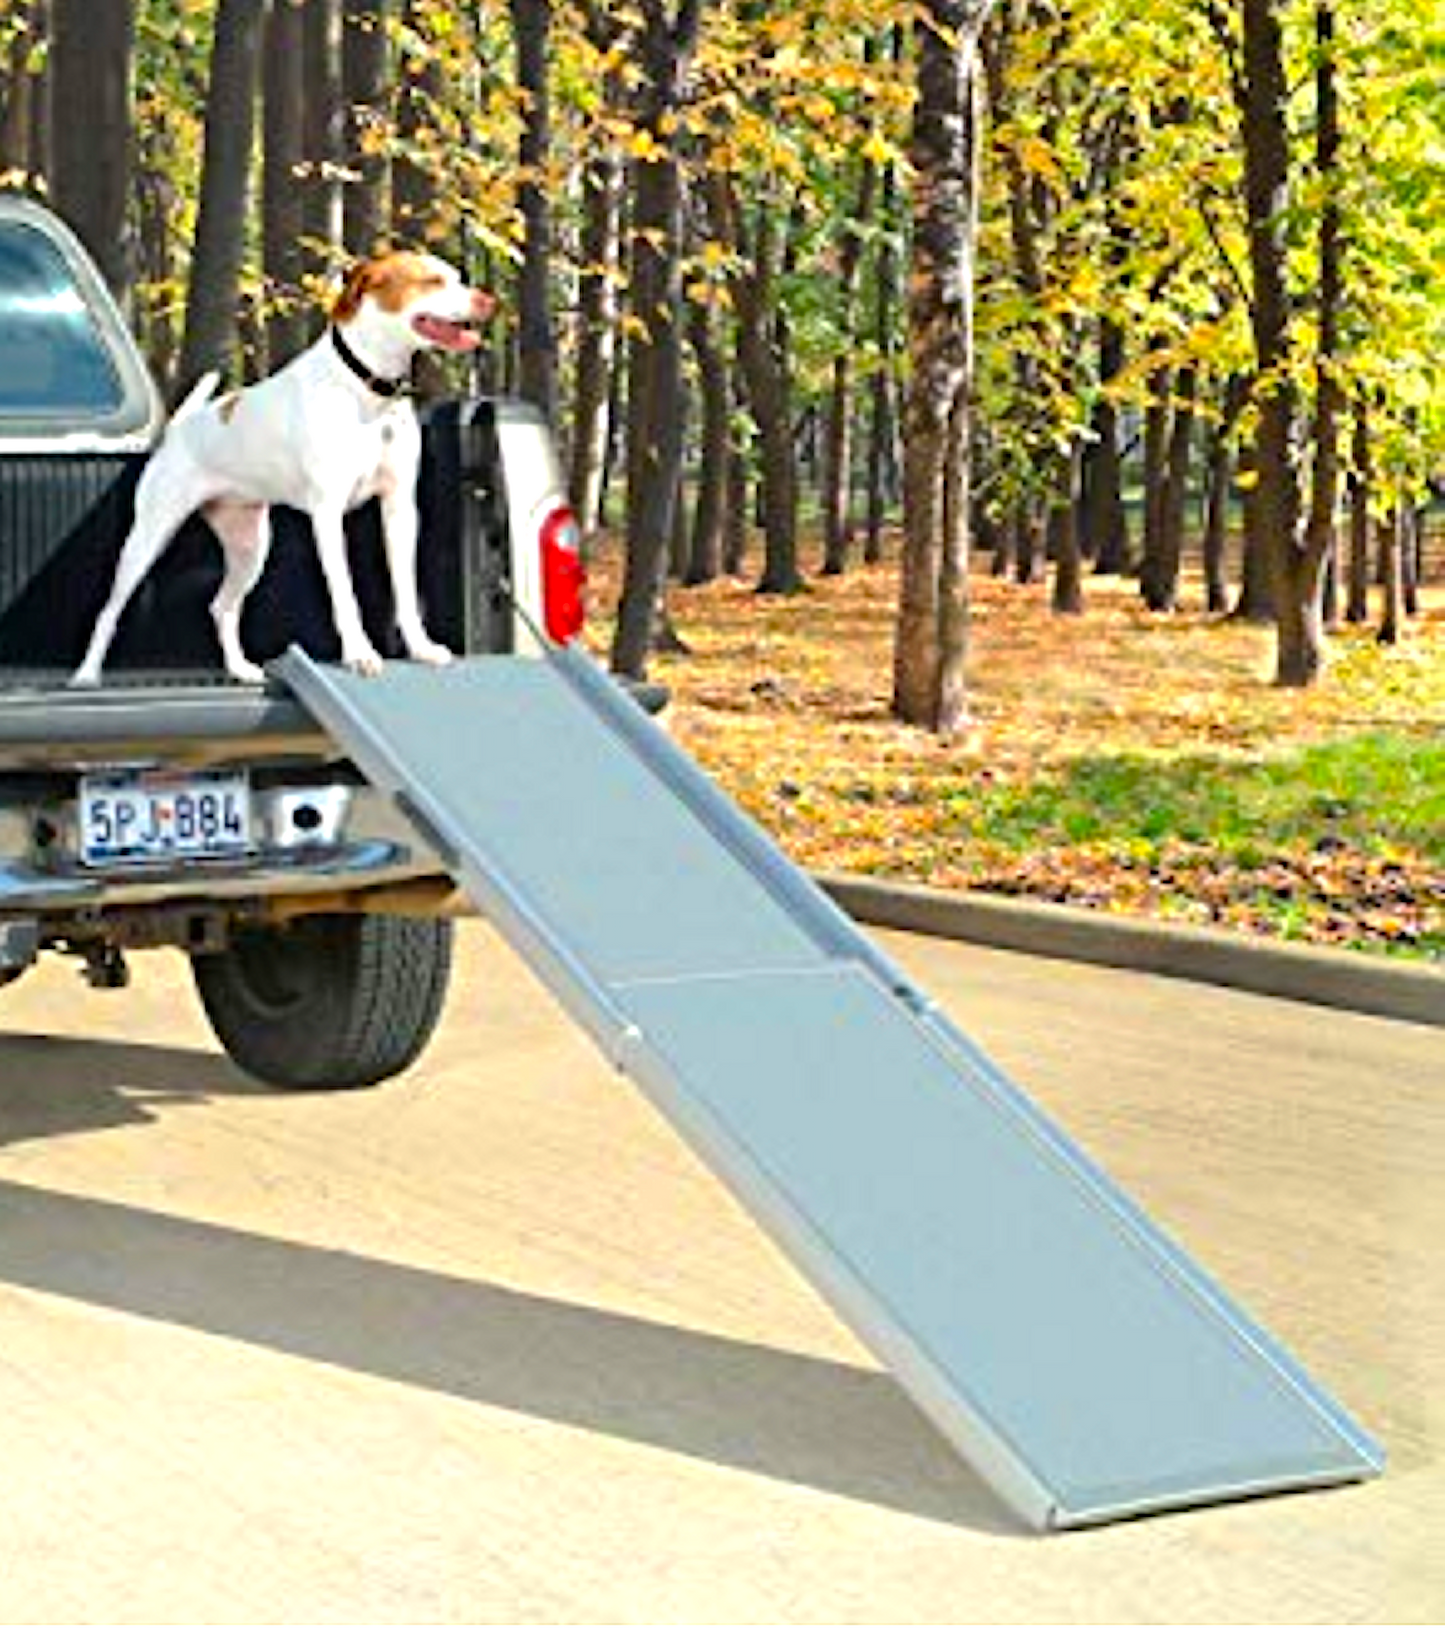 PETSAFE HAPPY RIDE TELESCOPING RAMP: portable and durable with high traction surface